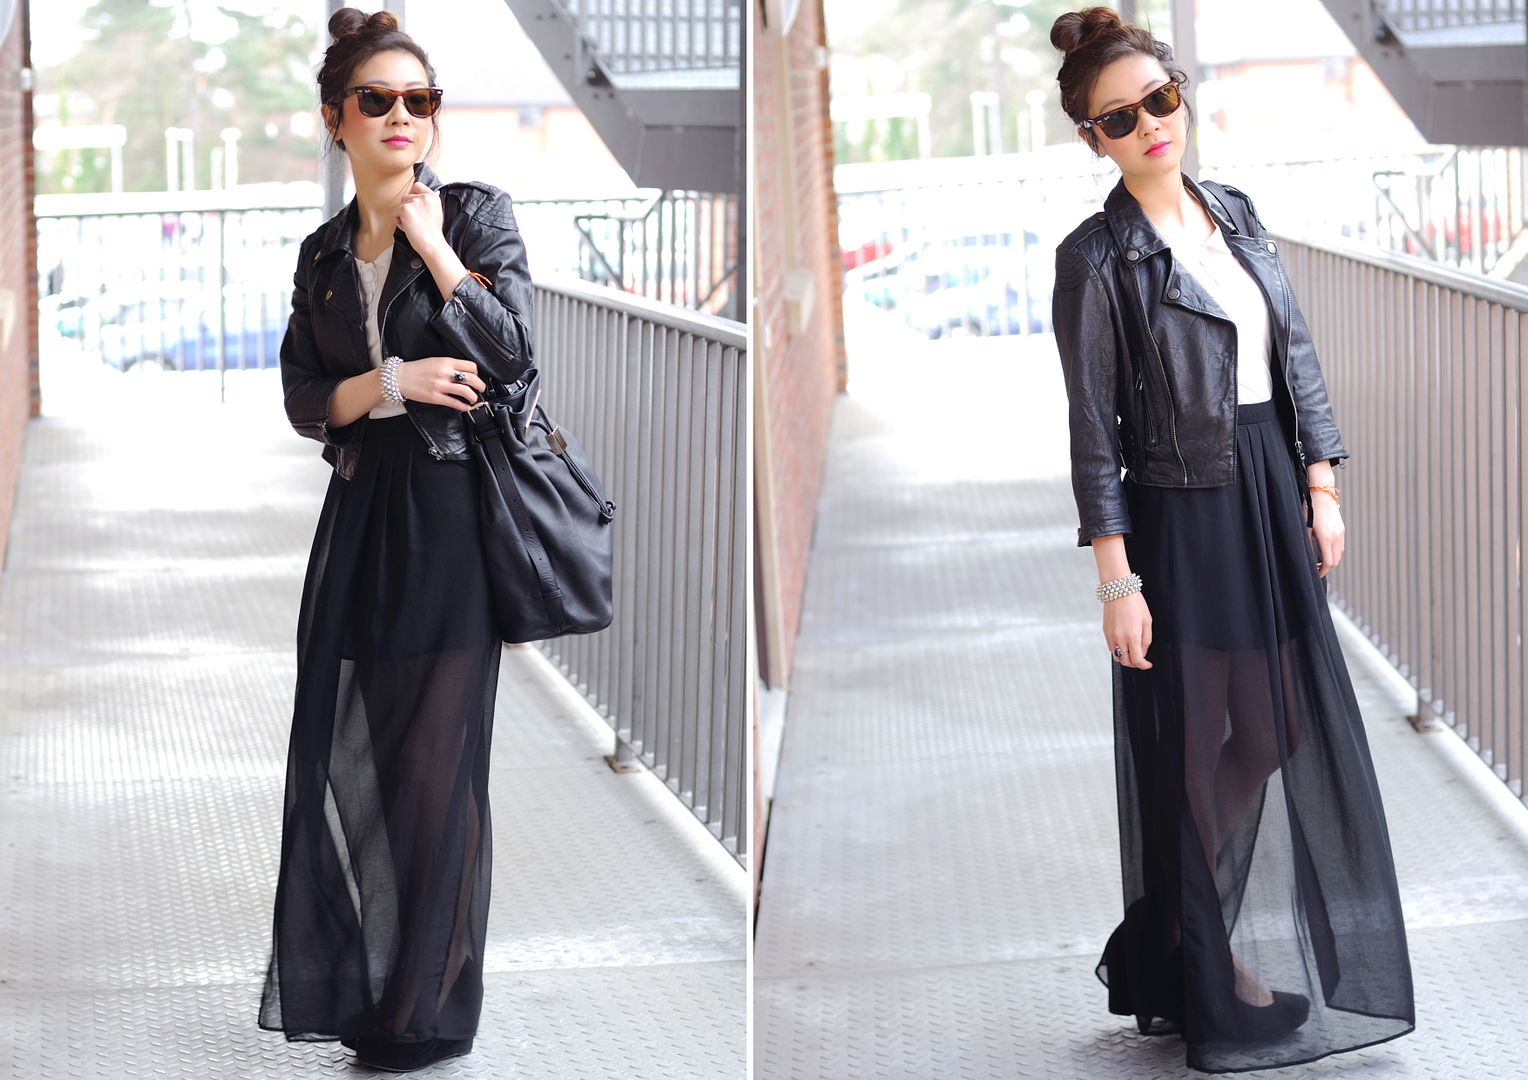  photo how_to_wear_maxi_skirt_zpsc6518fbe.jpg